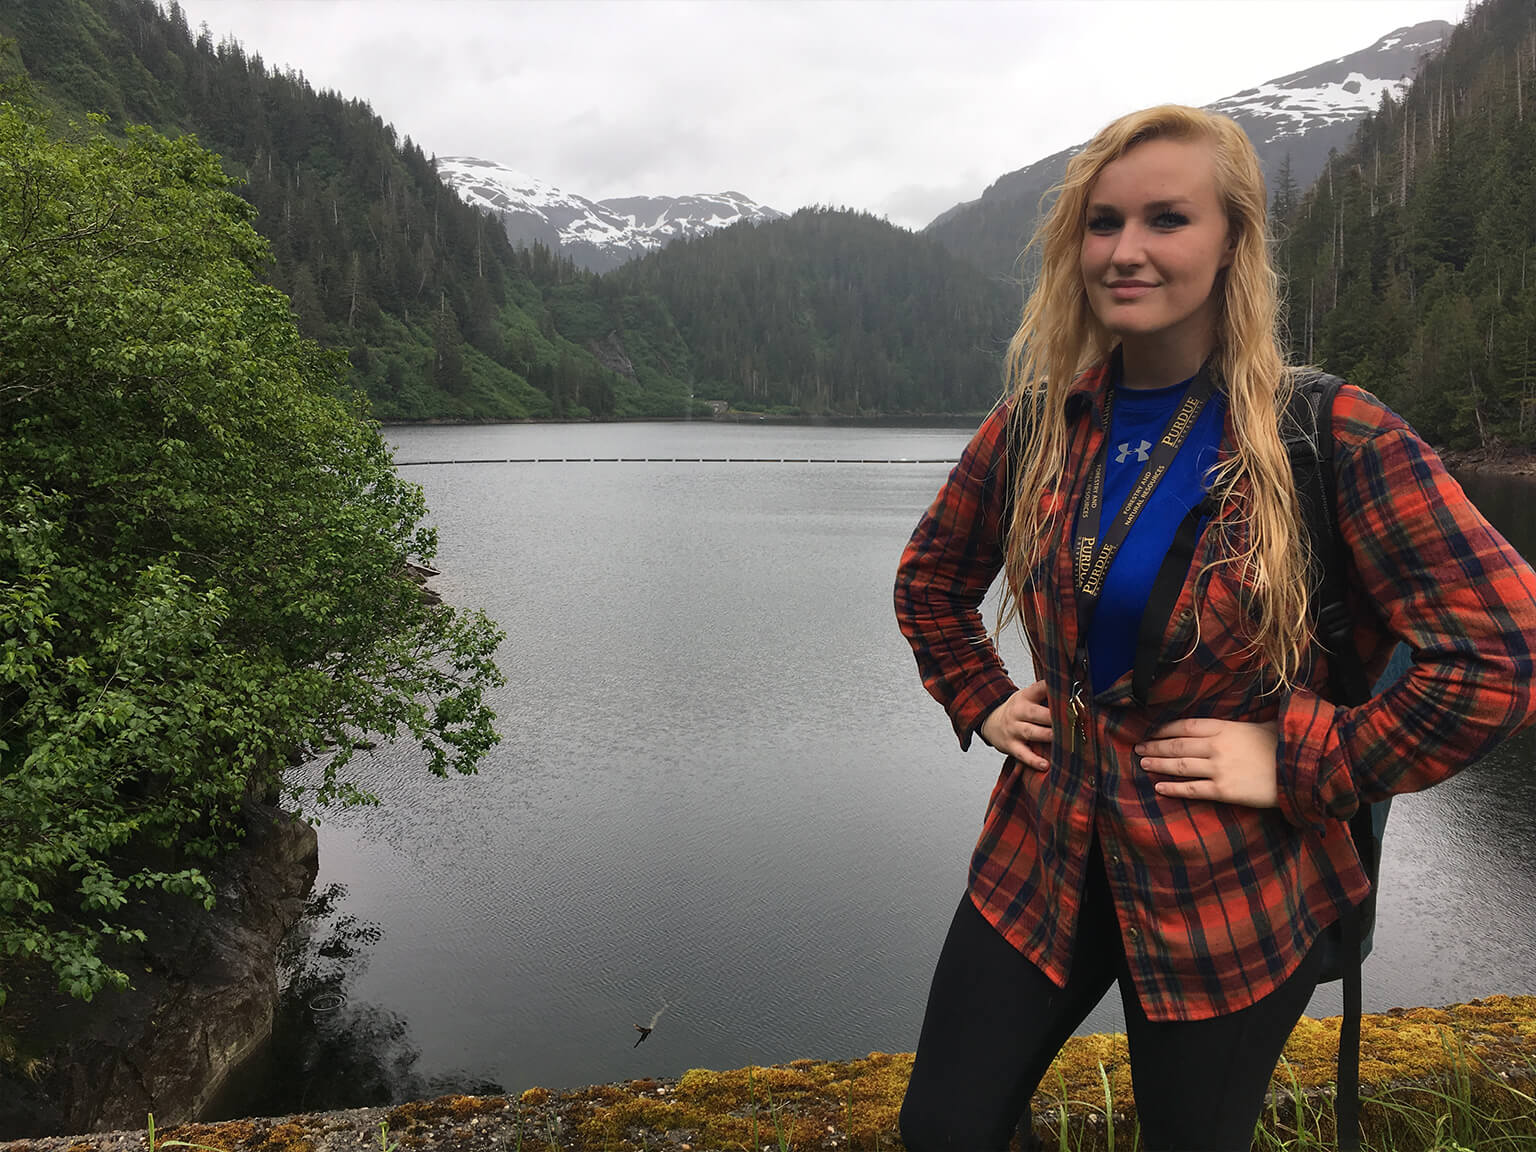 Rachel in Ketchikan, AK on the Misty-Fjord Ranger District of the Tongass National Forest.